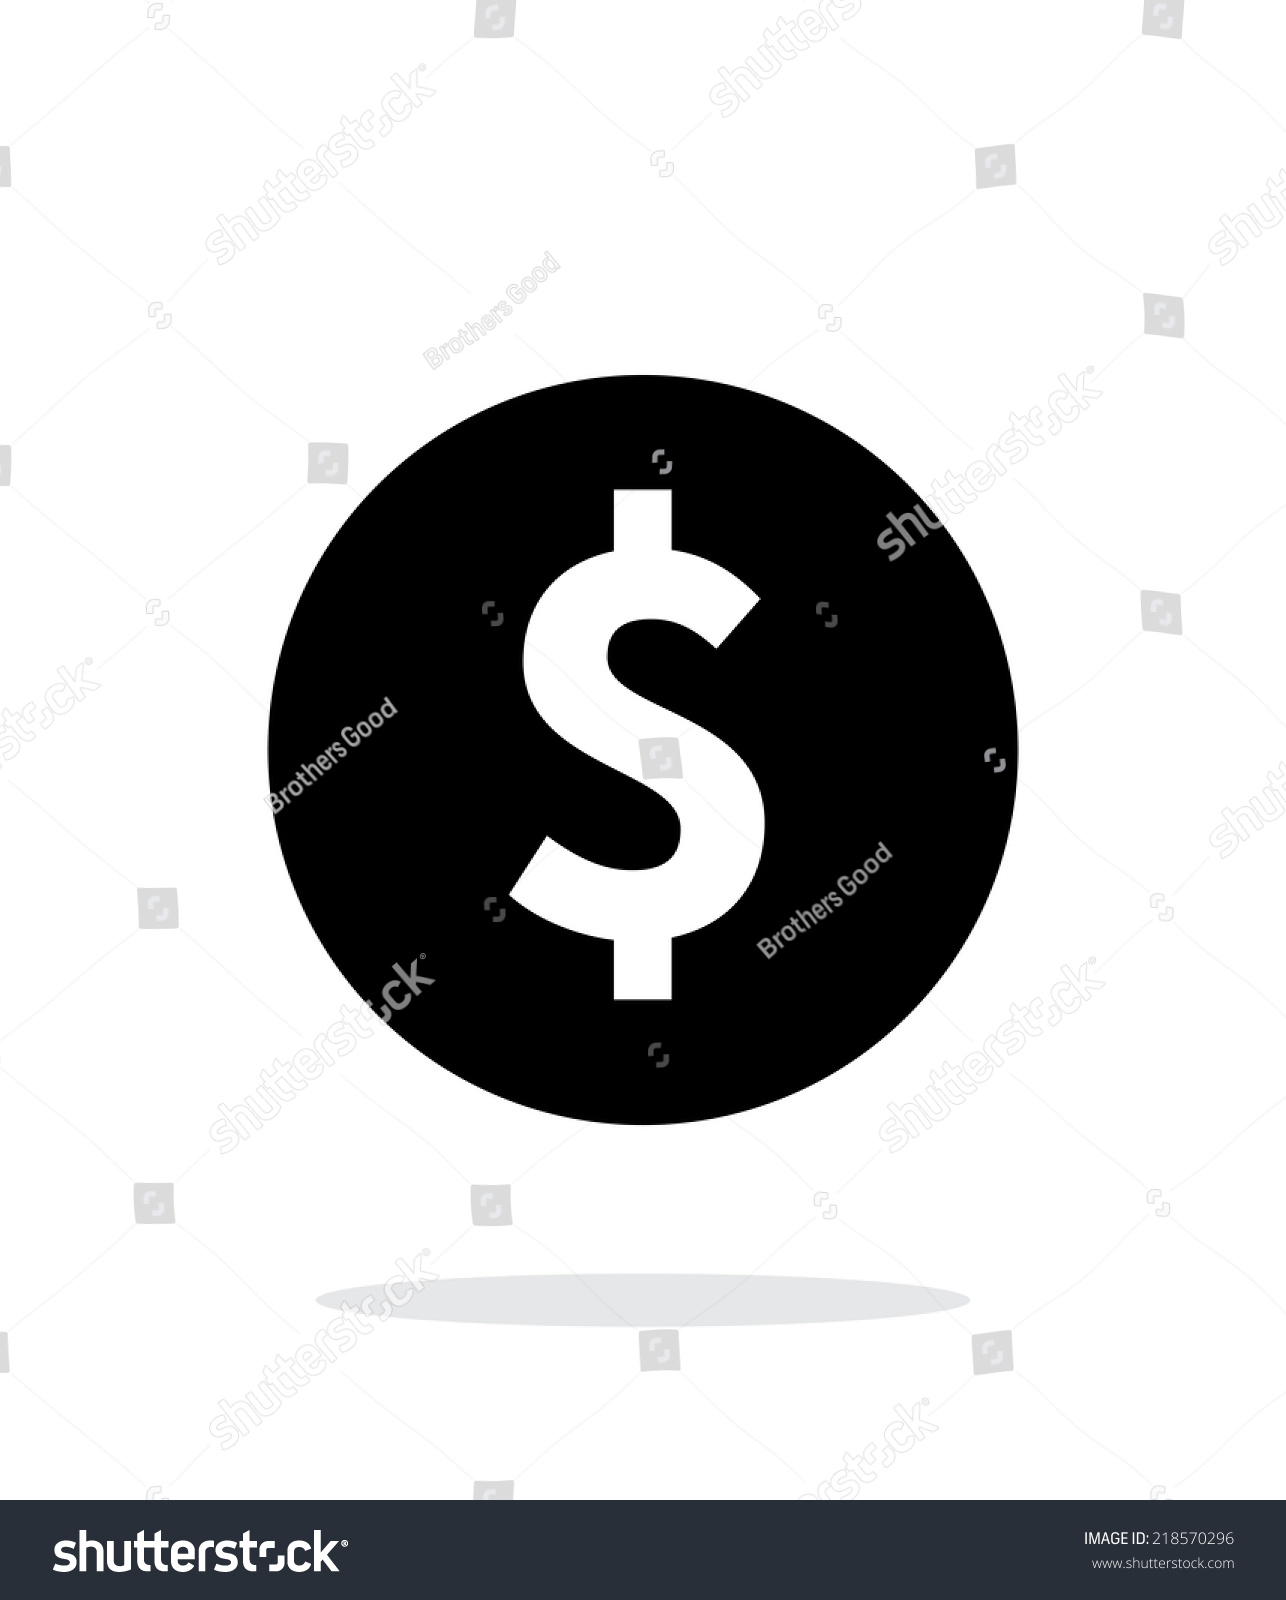 Coin Dollar Sign Simple Icon On Stock Photo (Photo, Vector ...